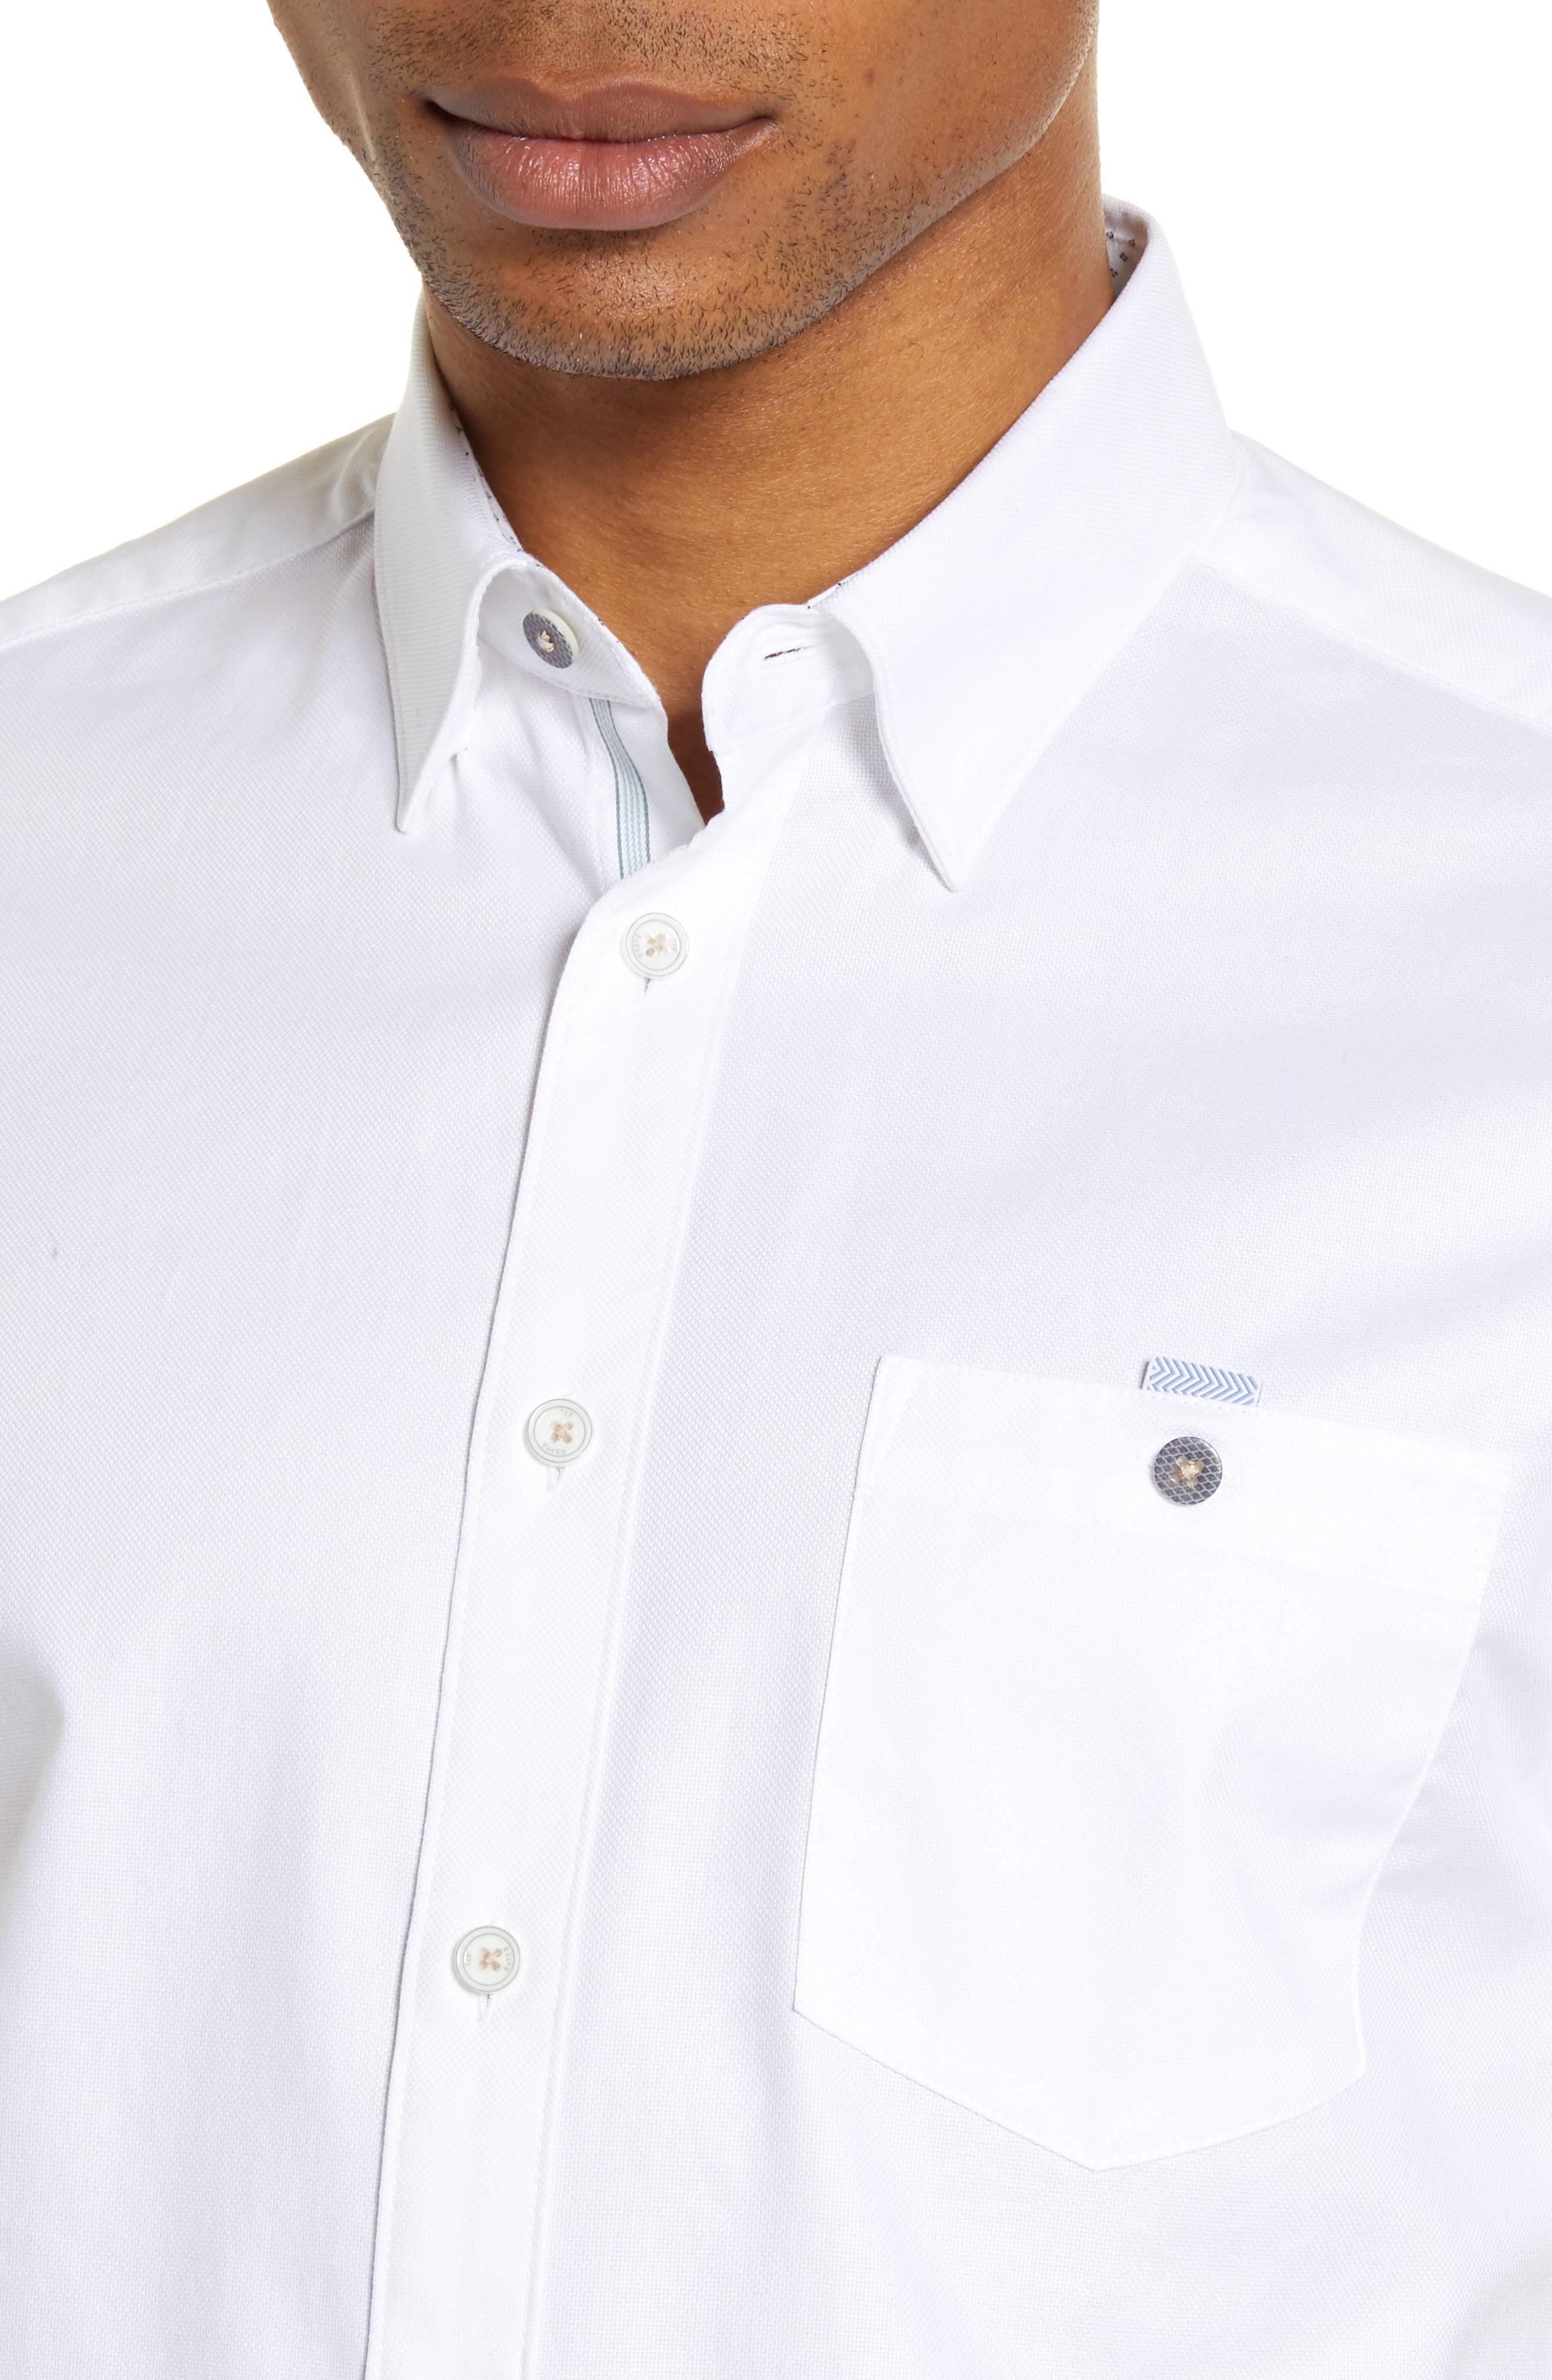 Ted Baker Cotton Yesso Short Sleeve Button-up Shirt in White for Men - Lyst